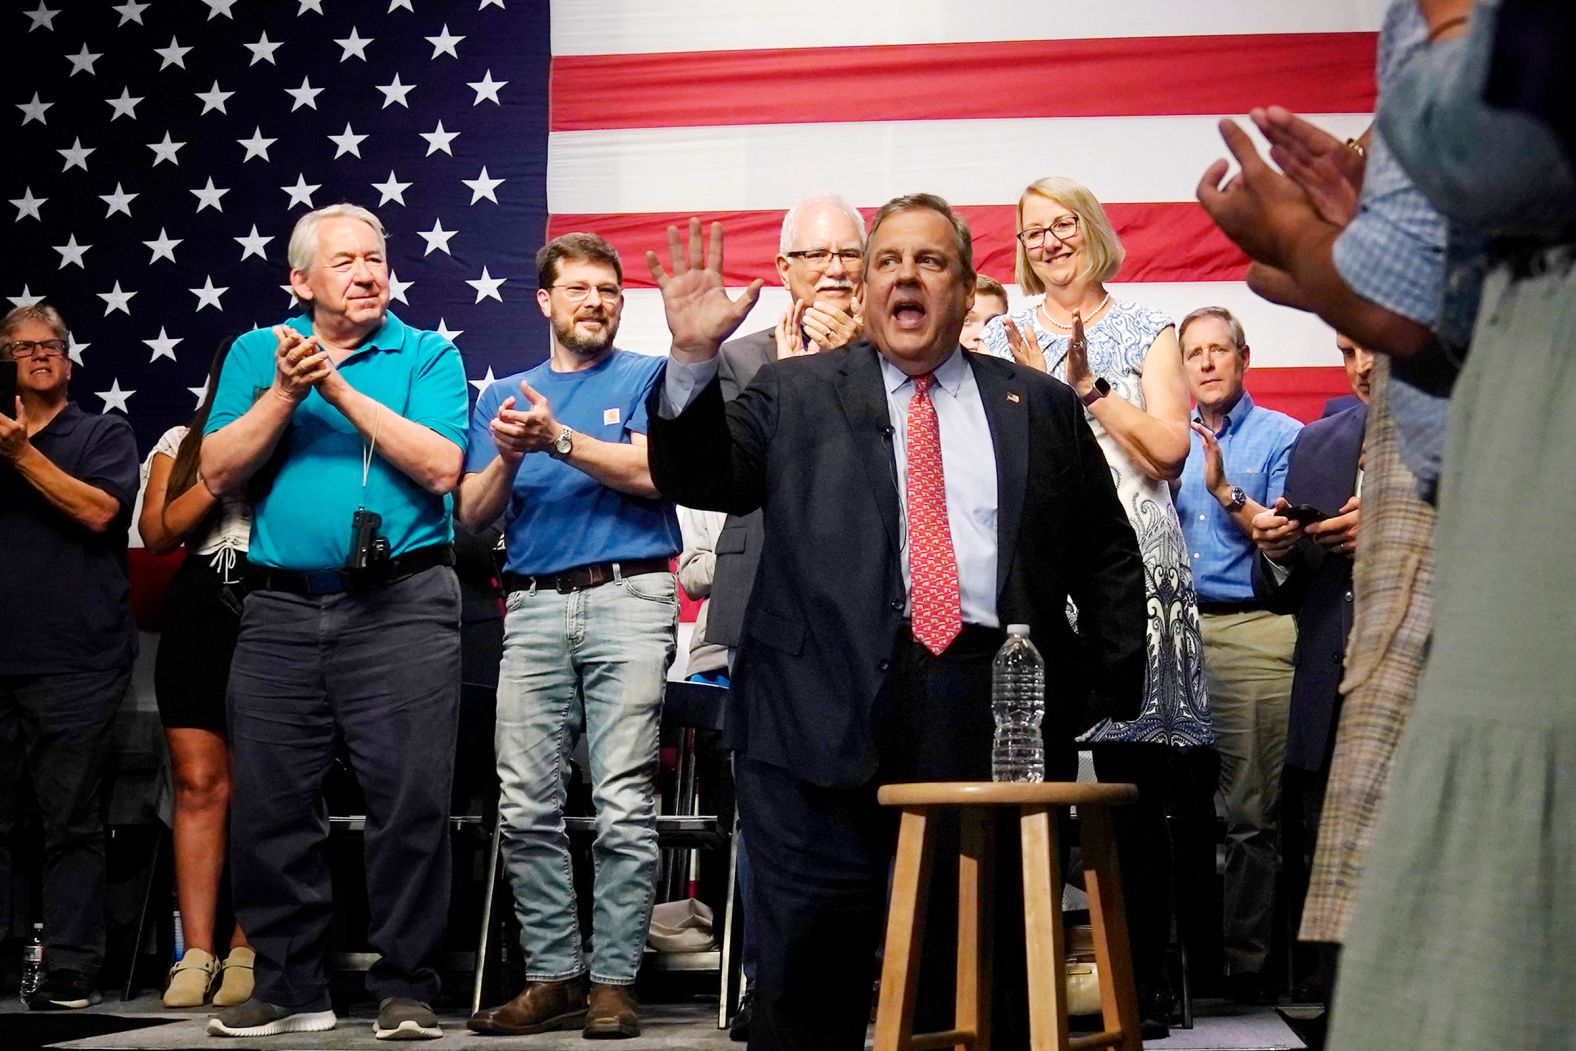 Christie waves to people in Manchester, New Hampshire, as he <a href="index.php?page=&url=https%3A%2F%2Fwww.cnn.com%2F2023%2F06%2F06%2Fpolitics%2Fchris-christie-2024-announcement%2Findex.html" target="_blank">announces his presidential run</a> in June 2023.